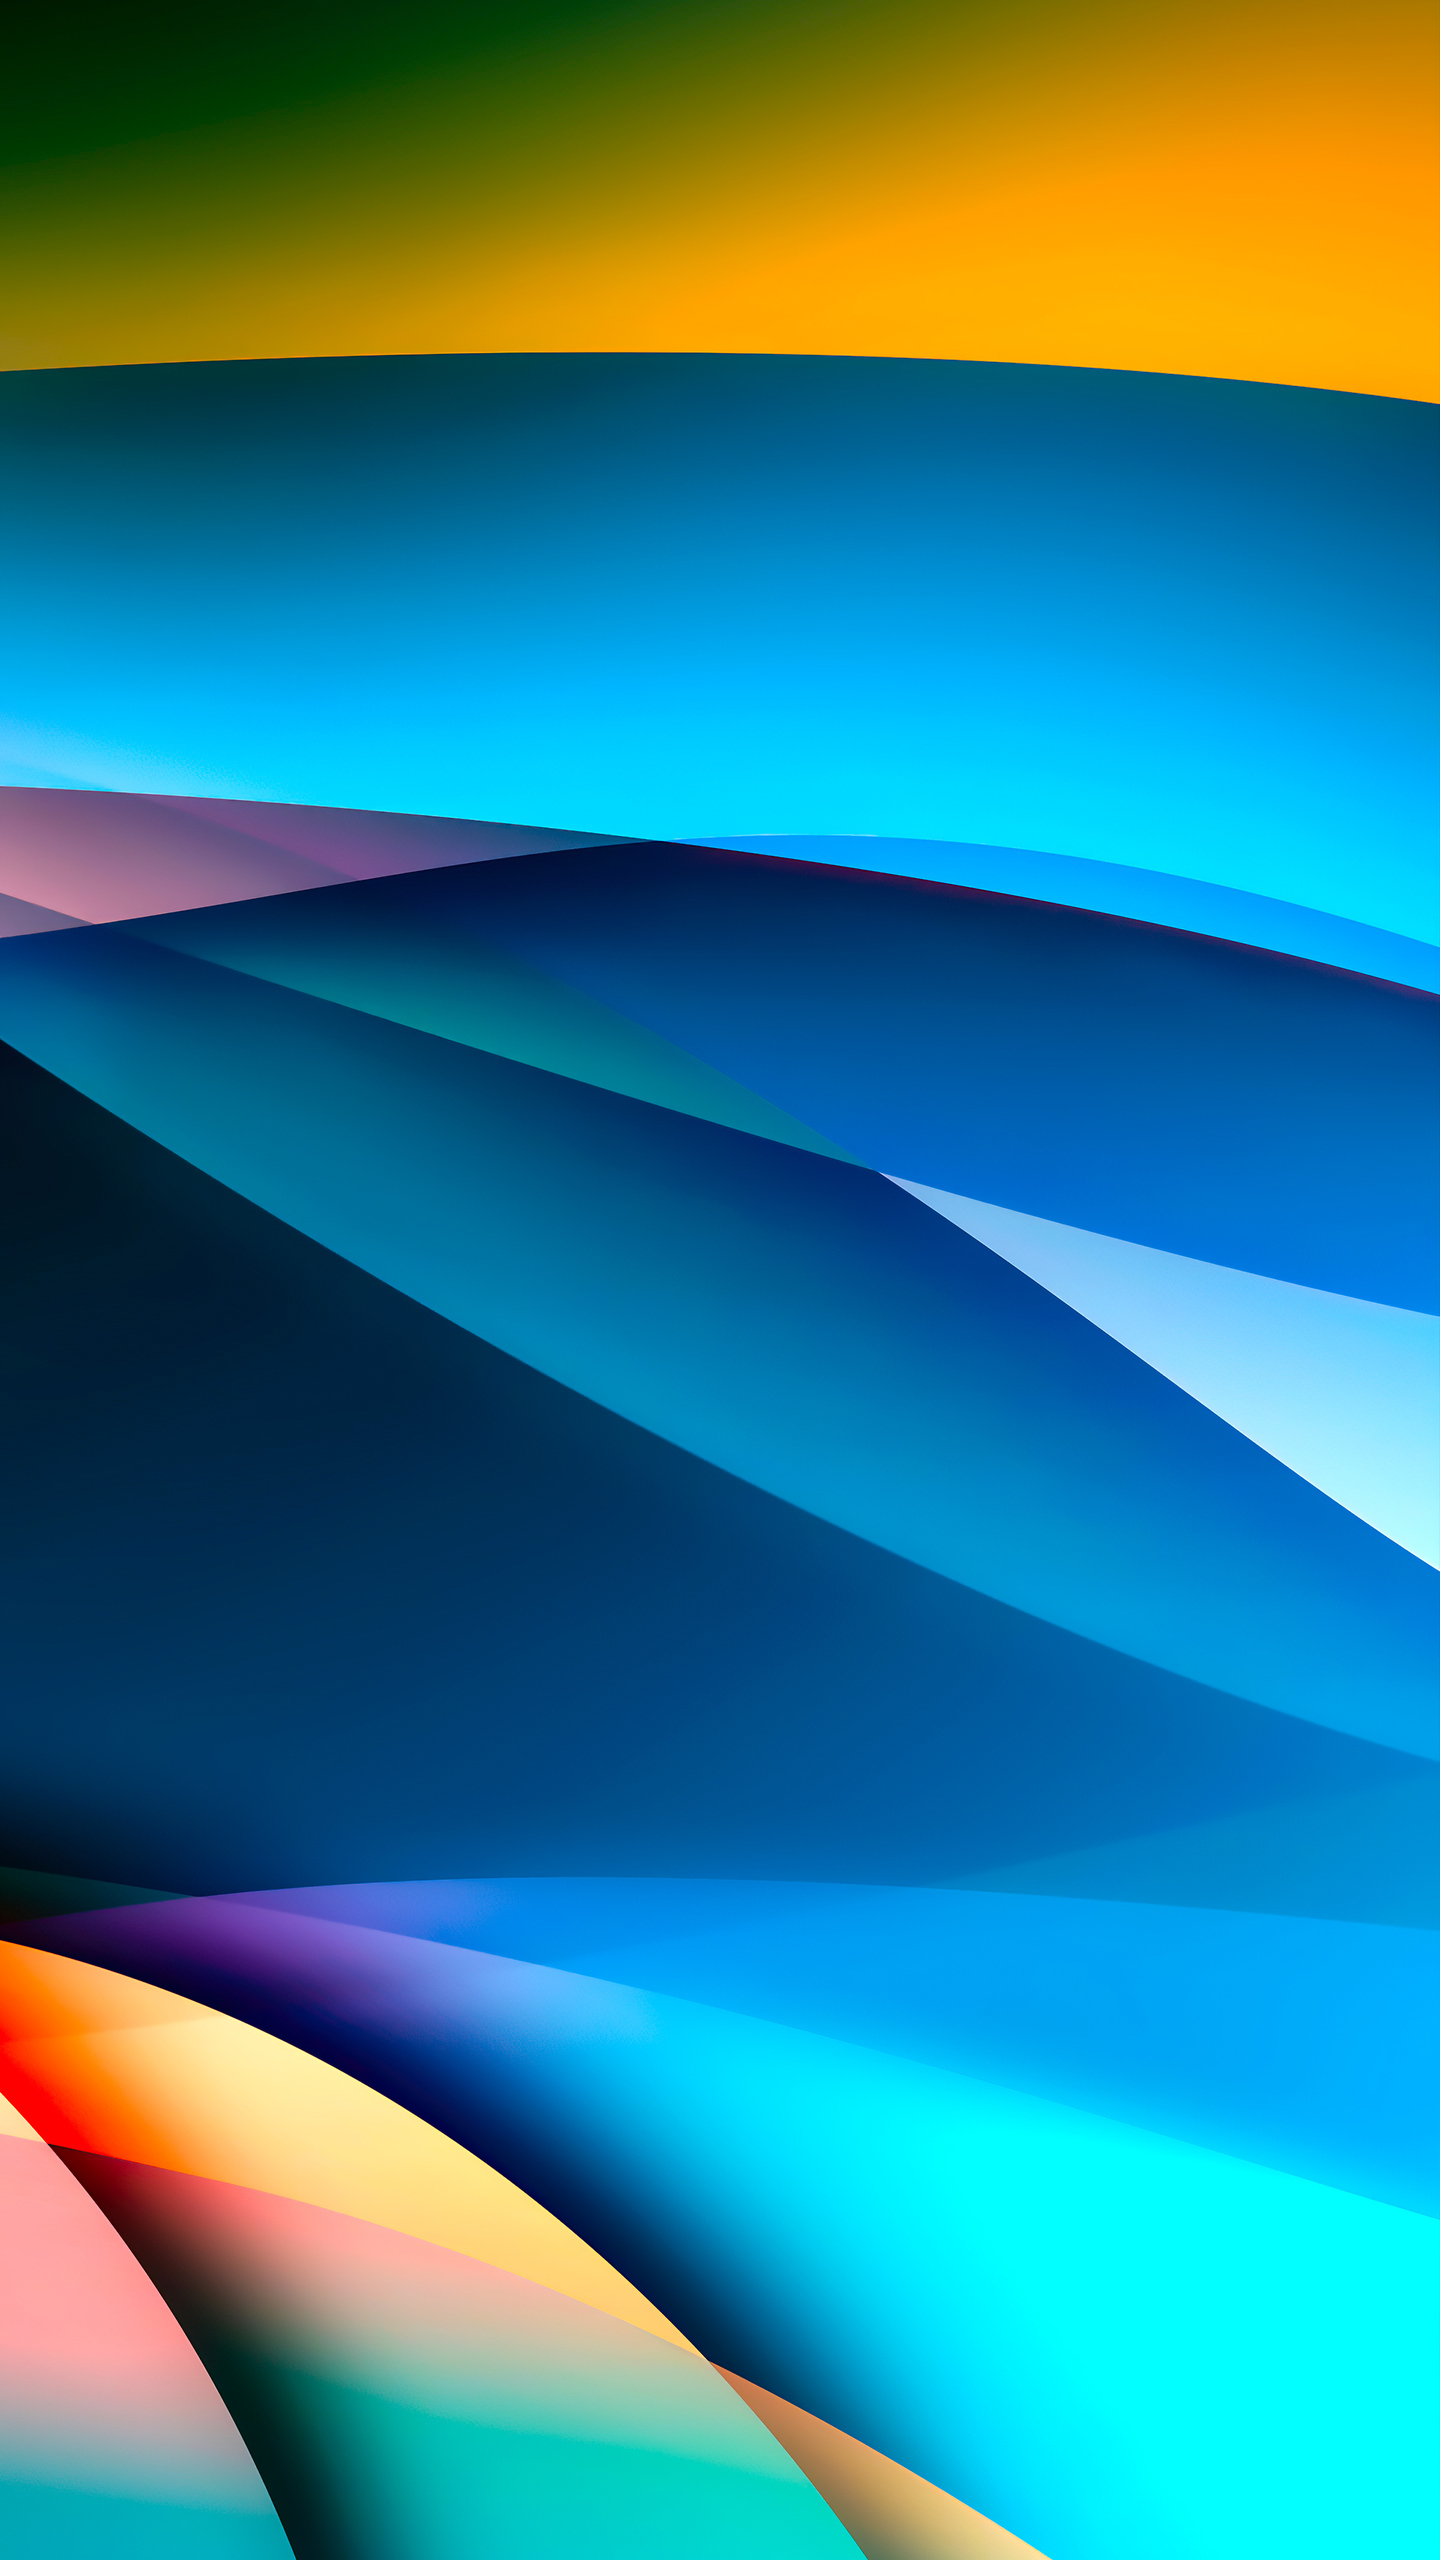 1440x2560 Abstract Gradient Colorful Art 4k Samsung Galaxy S6,S7 ...